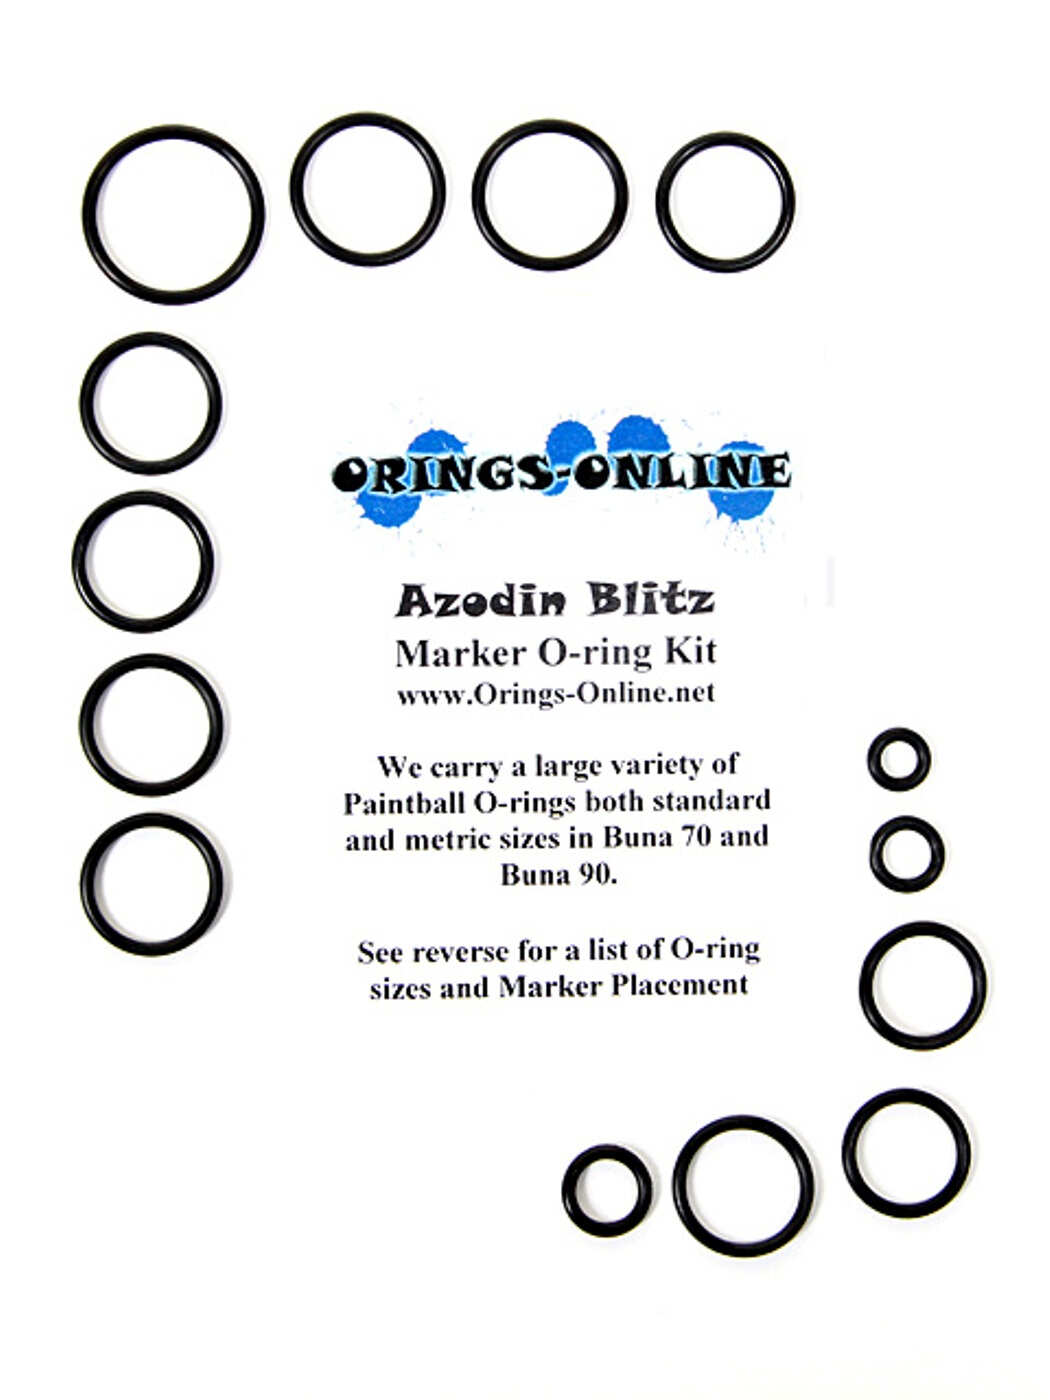 All Products : Orings-Online, Your only source for O-rings!